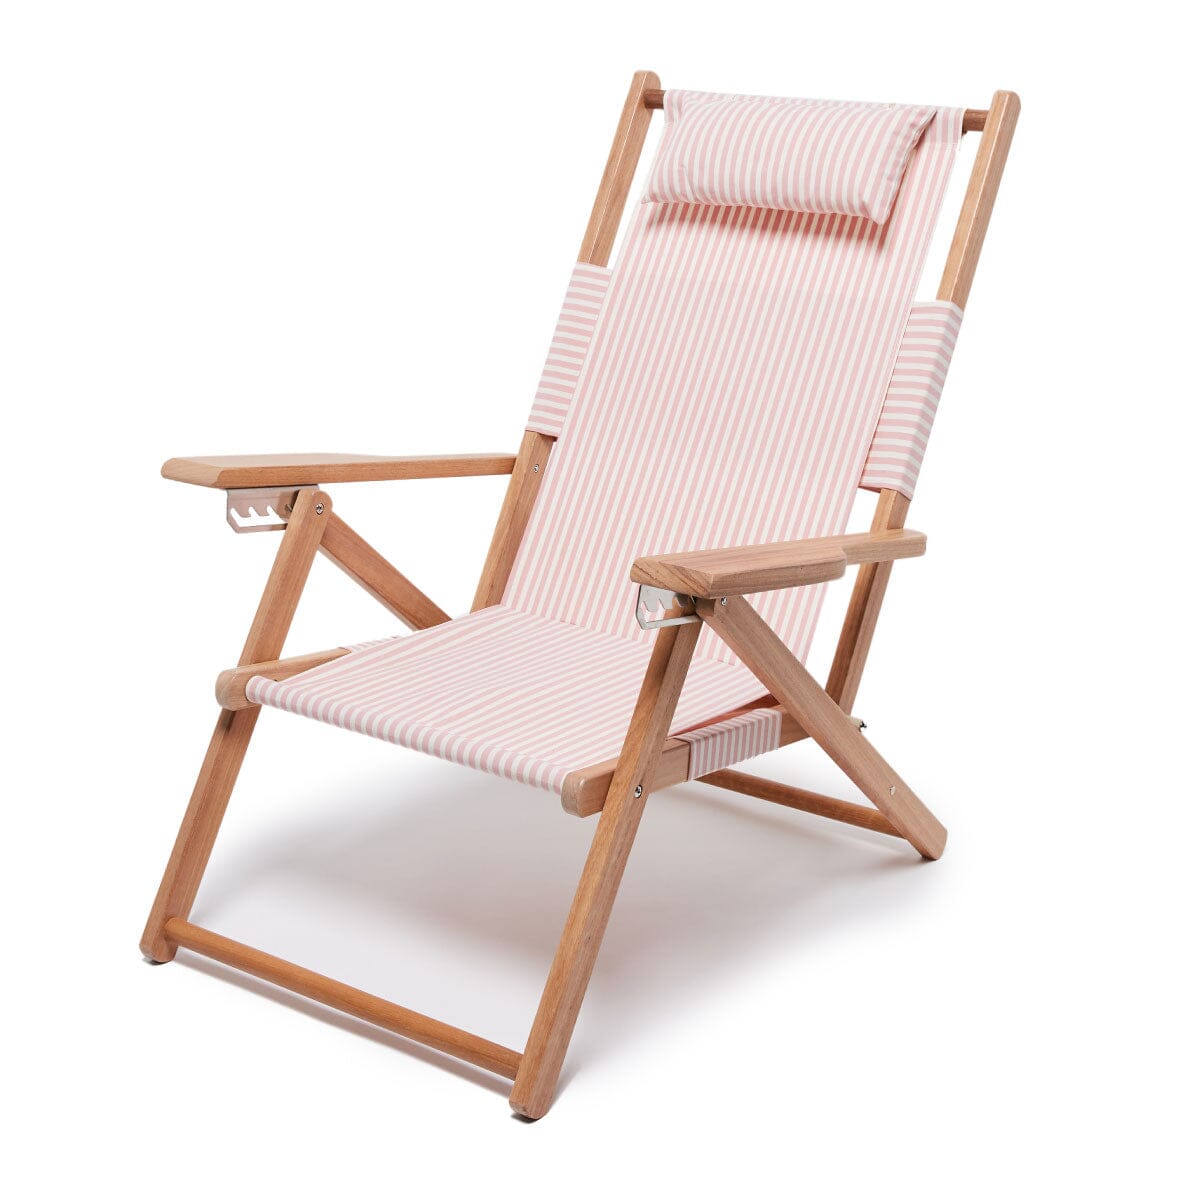 The Tommy Chair - Lauren's Pink Stripe